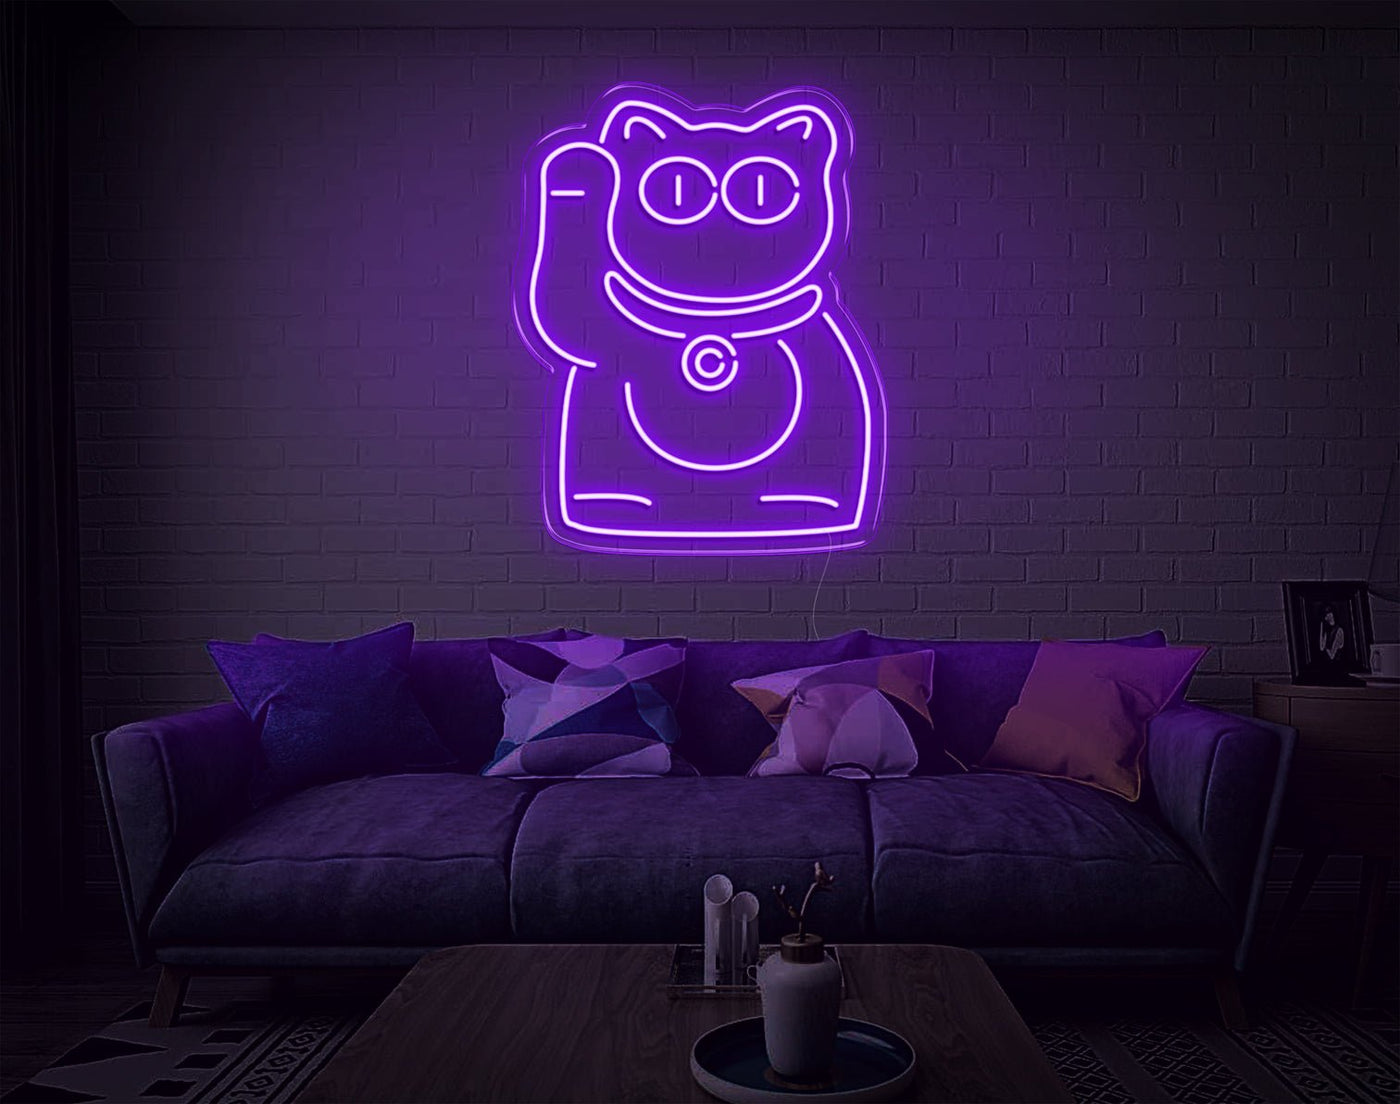 Cat V3 LED Neon Sign - 9inch x 7inchHot Pink